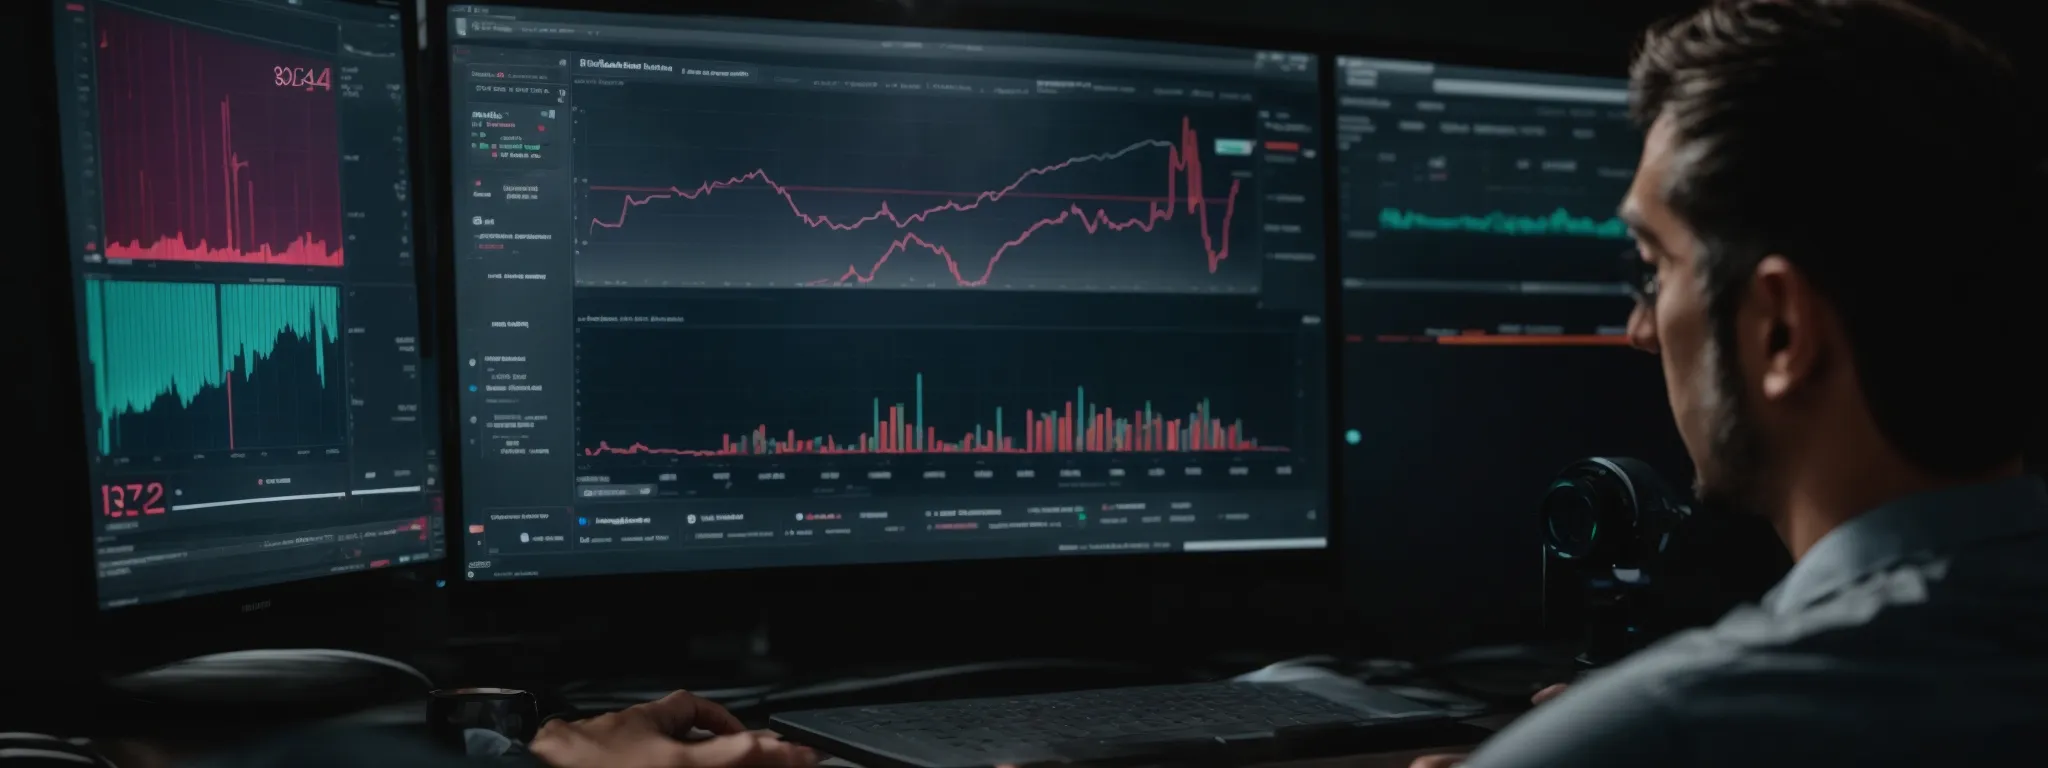 a content creator thoughtfully analyzes a vibrant dashboard displaying seo analytics and keyword trends on a computer screen.